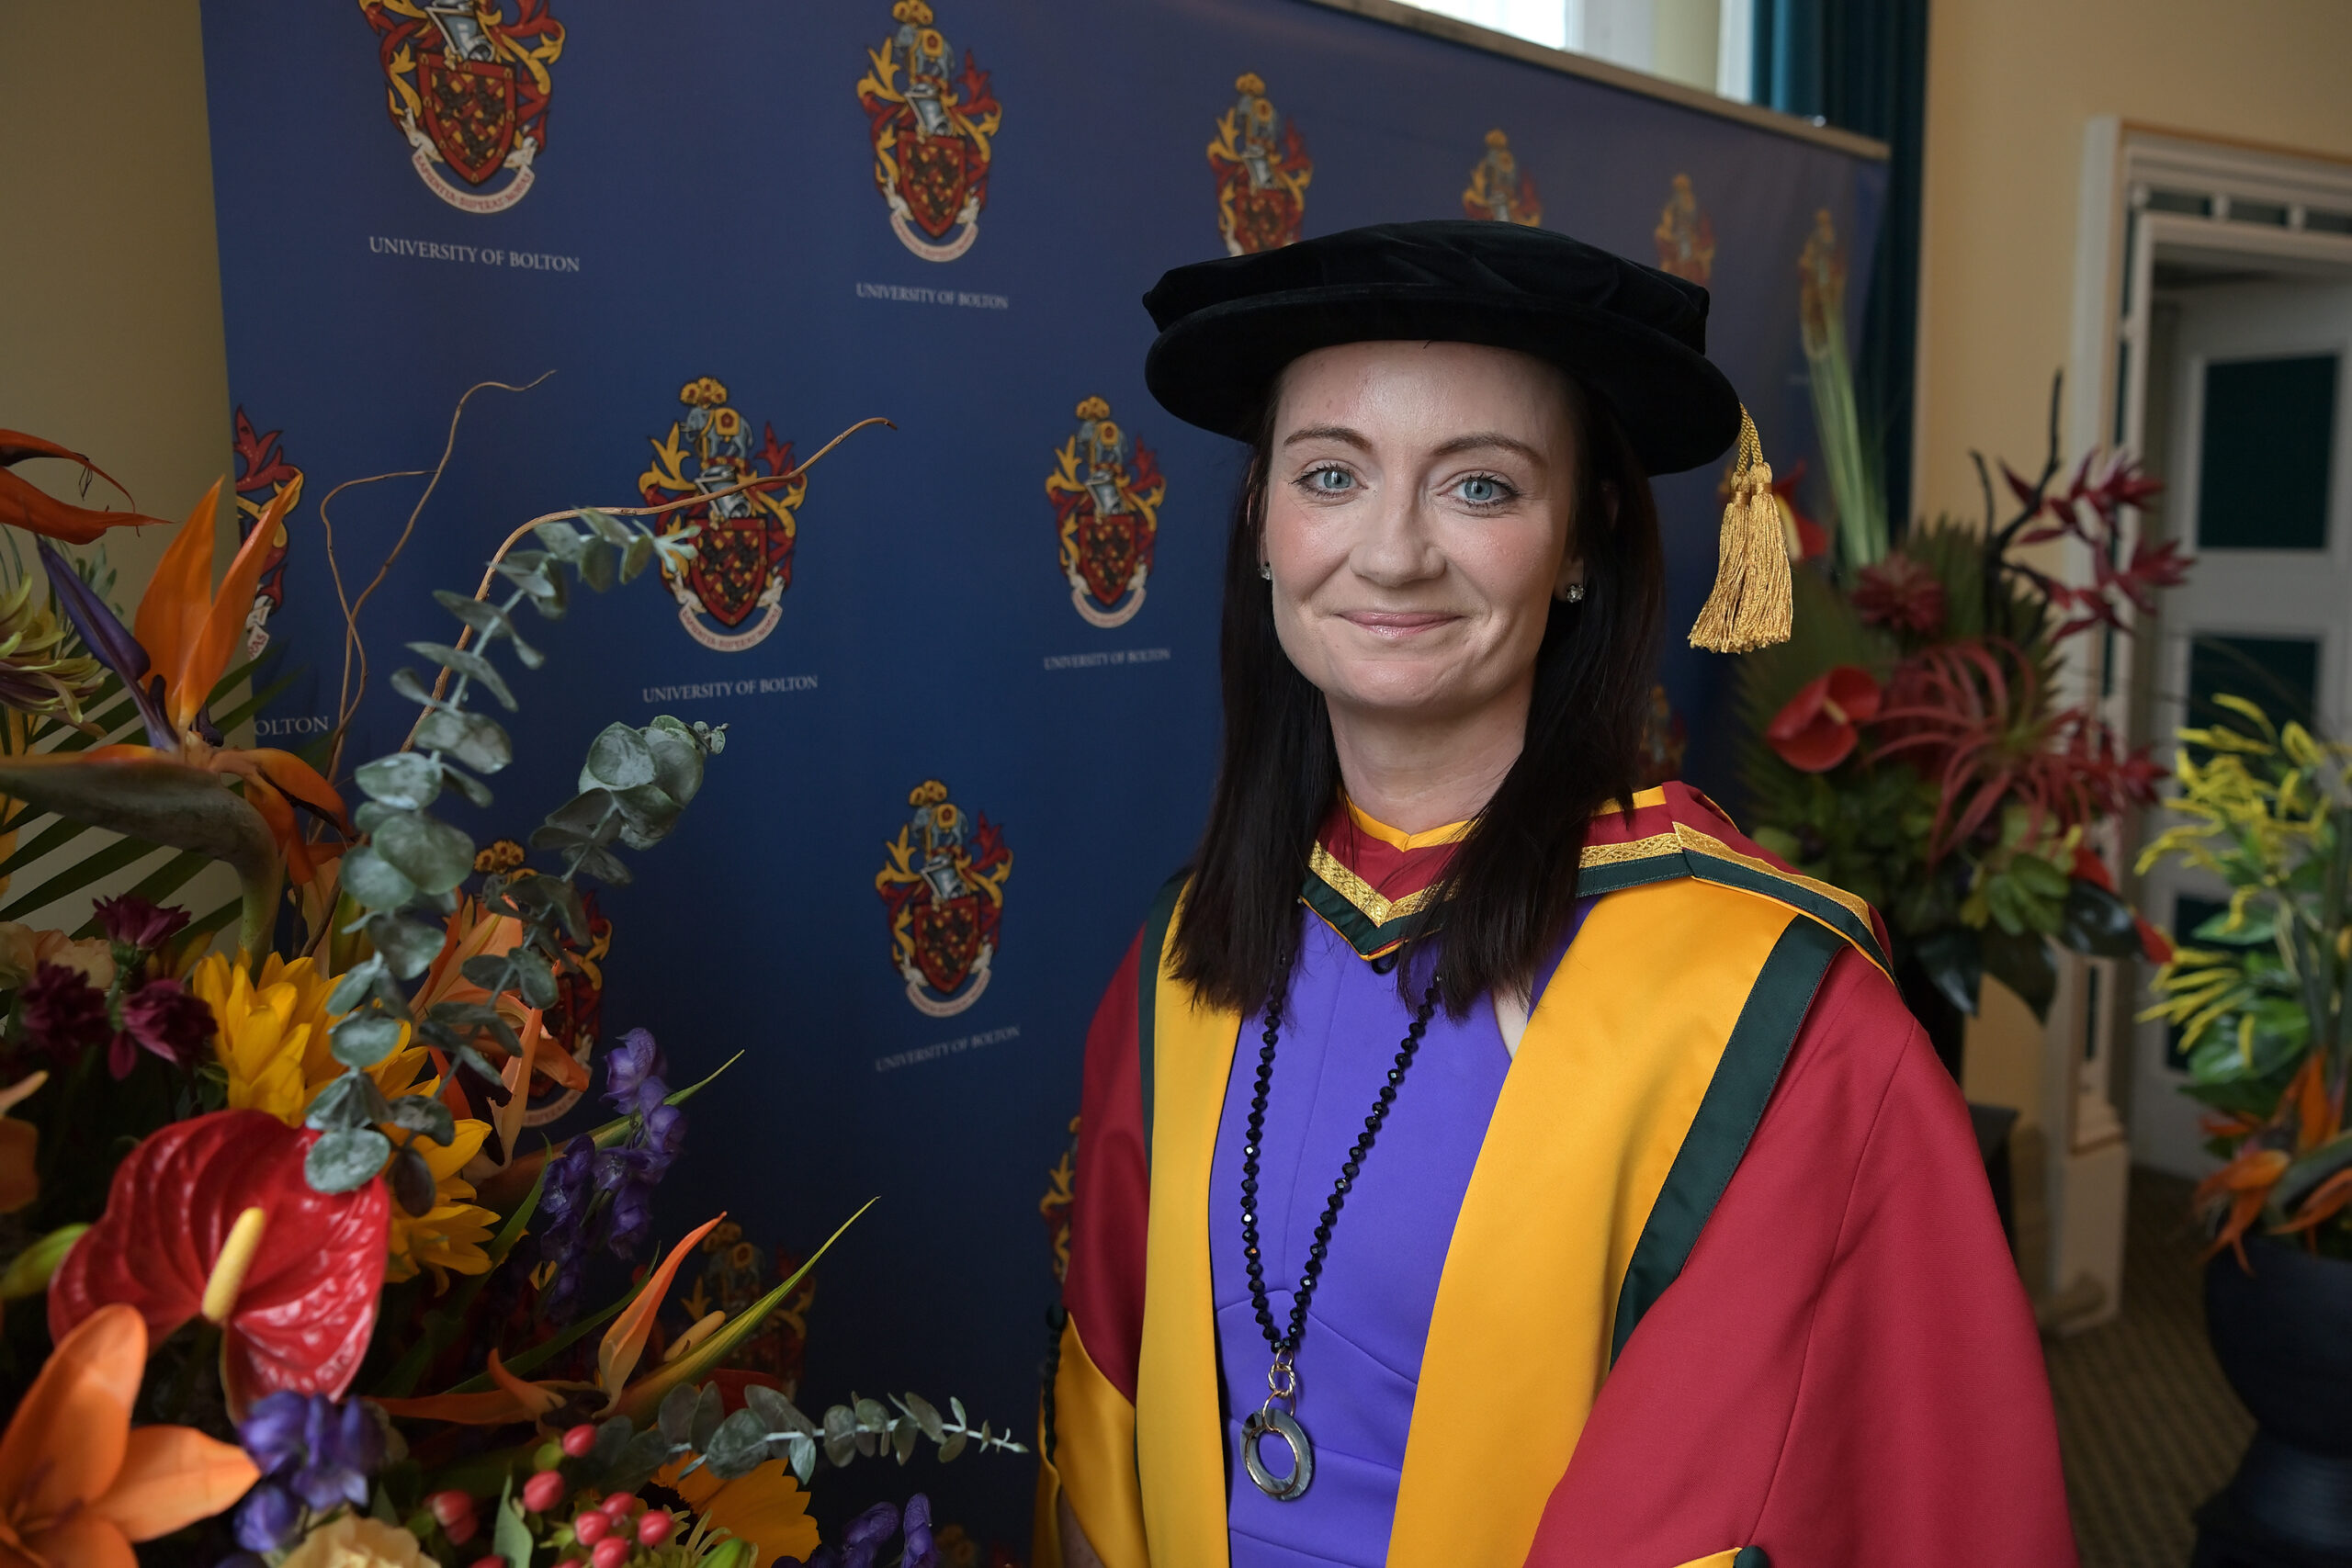 Dr Helen Wall in her graduation robes of red with a yellow collar and the black cap